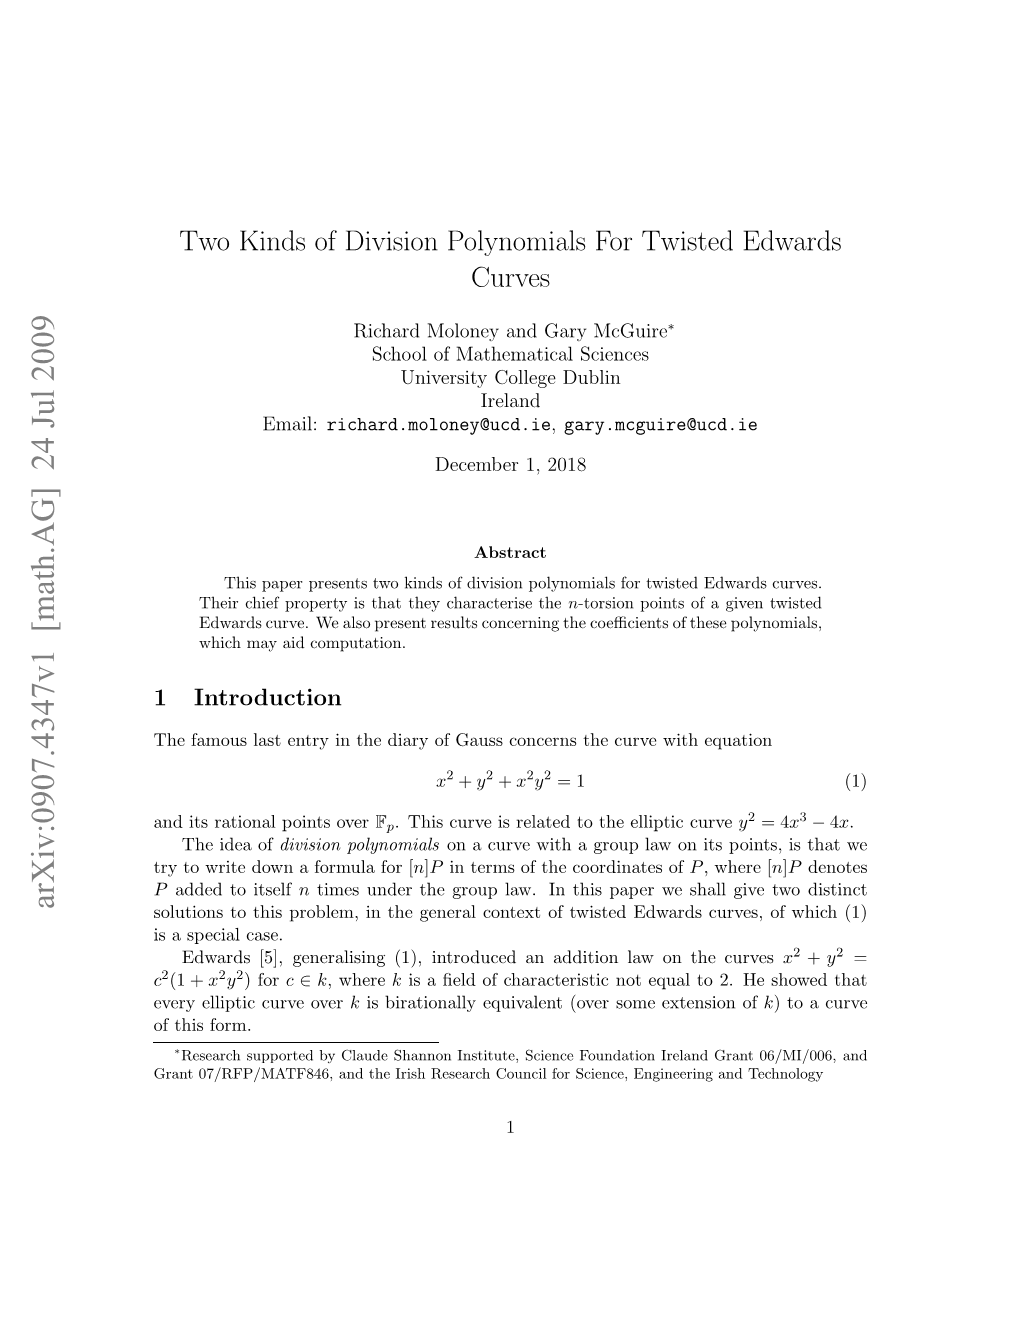 Two Kinds of Division Polynomials for Twisted Edwards Curves